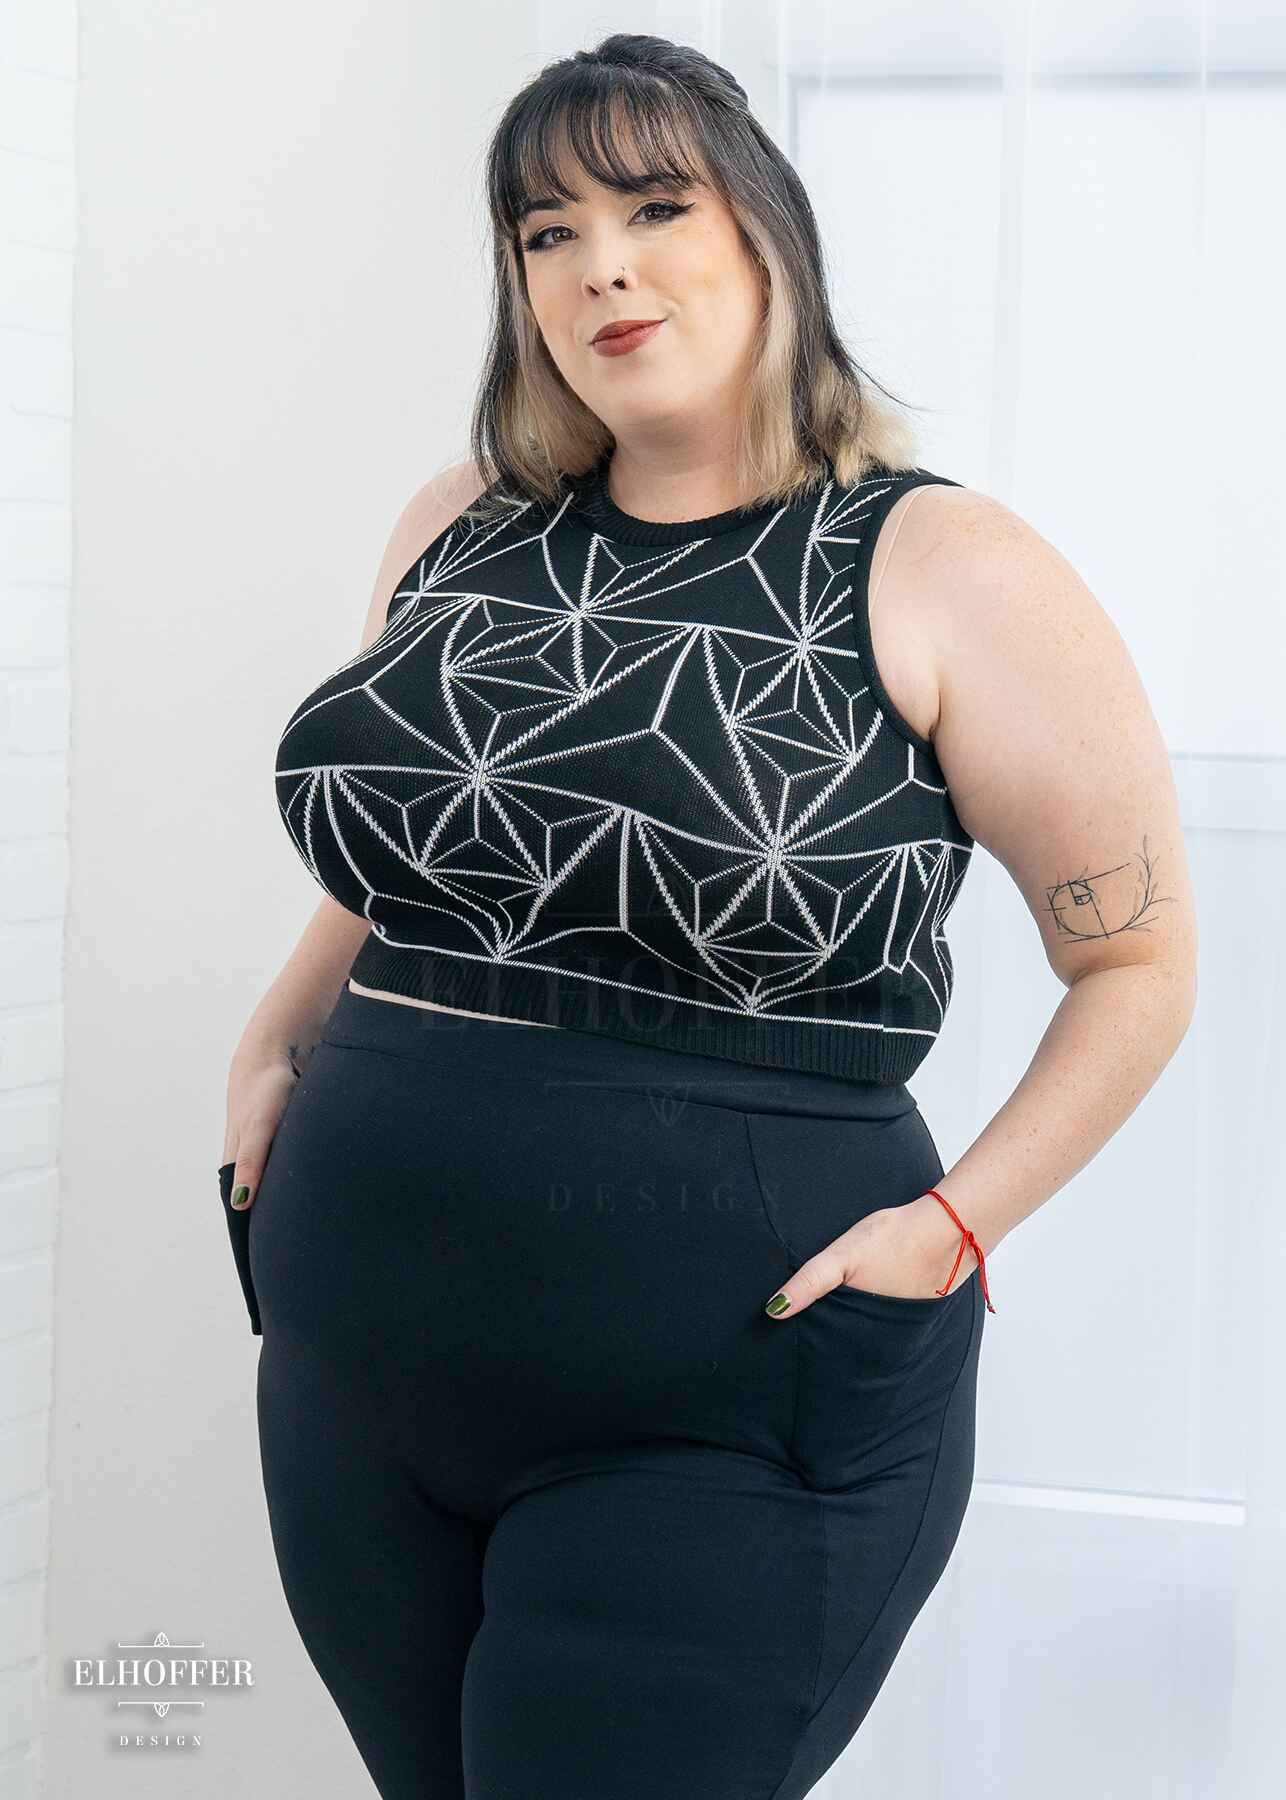 Katie Lynn, a fair skinned 2xl model with short black and white hair with bangs, is wearing a pullover cropped sleeveless sweater.  The main body of the sweater is black and has a white geometric 3d triangle design. She paired the crop top with black leggings.